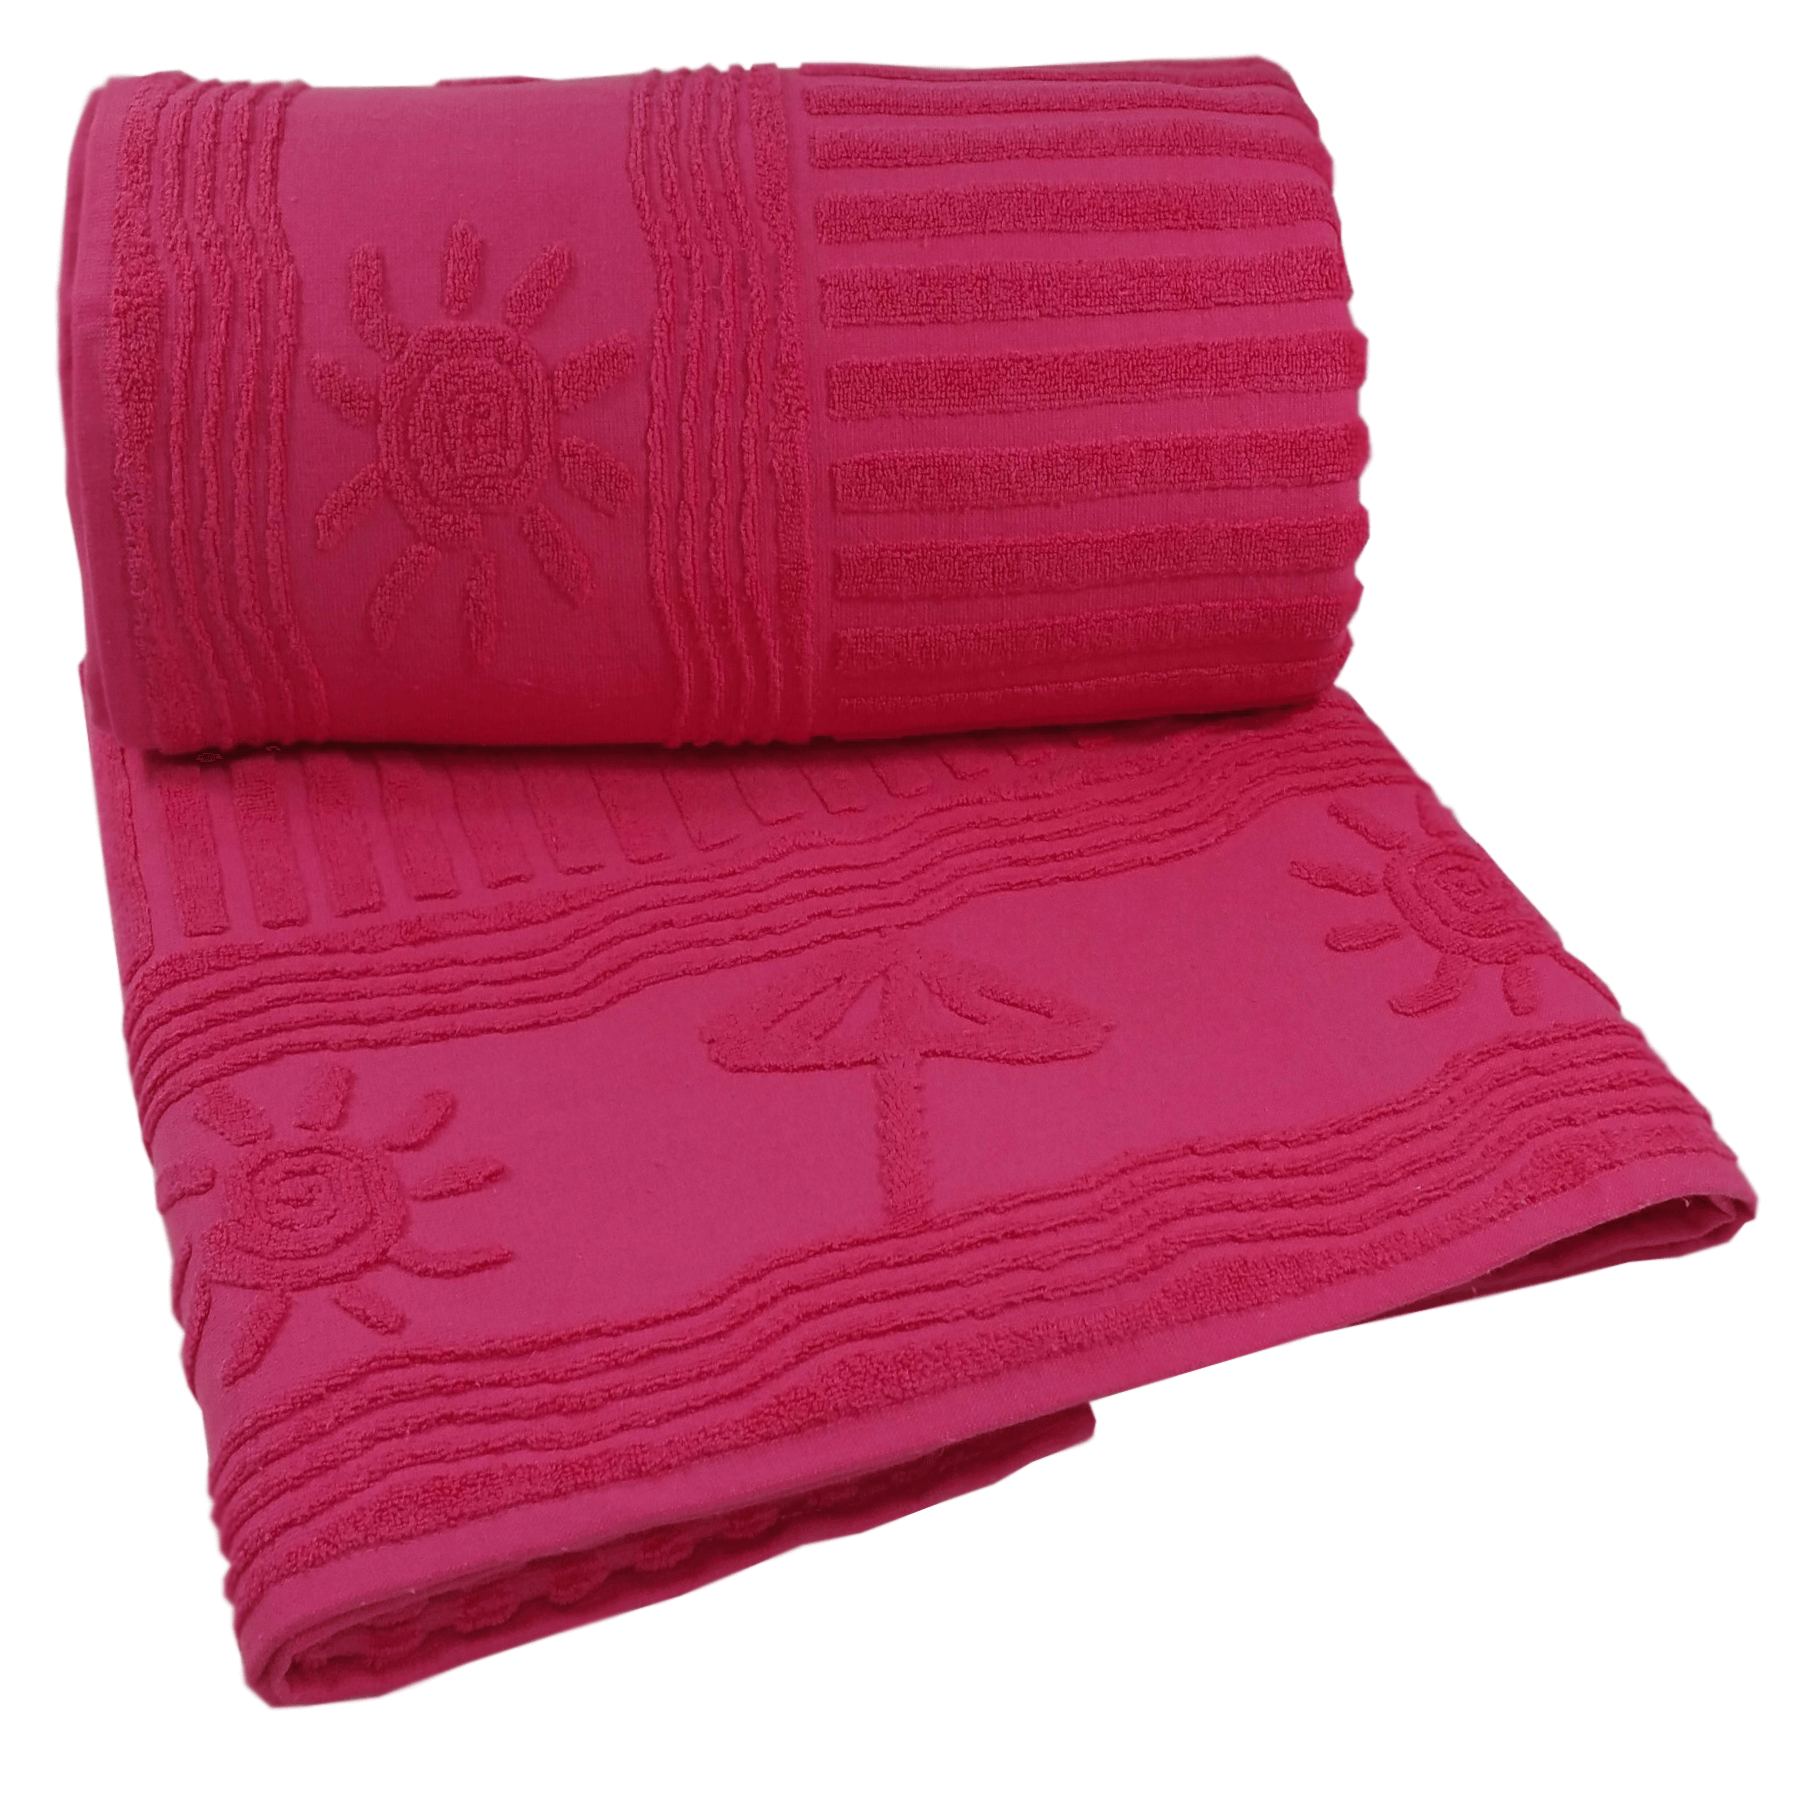 extra large beach towels great corporate gift fuscia